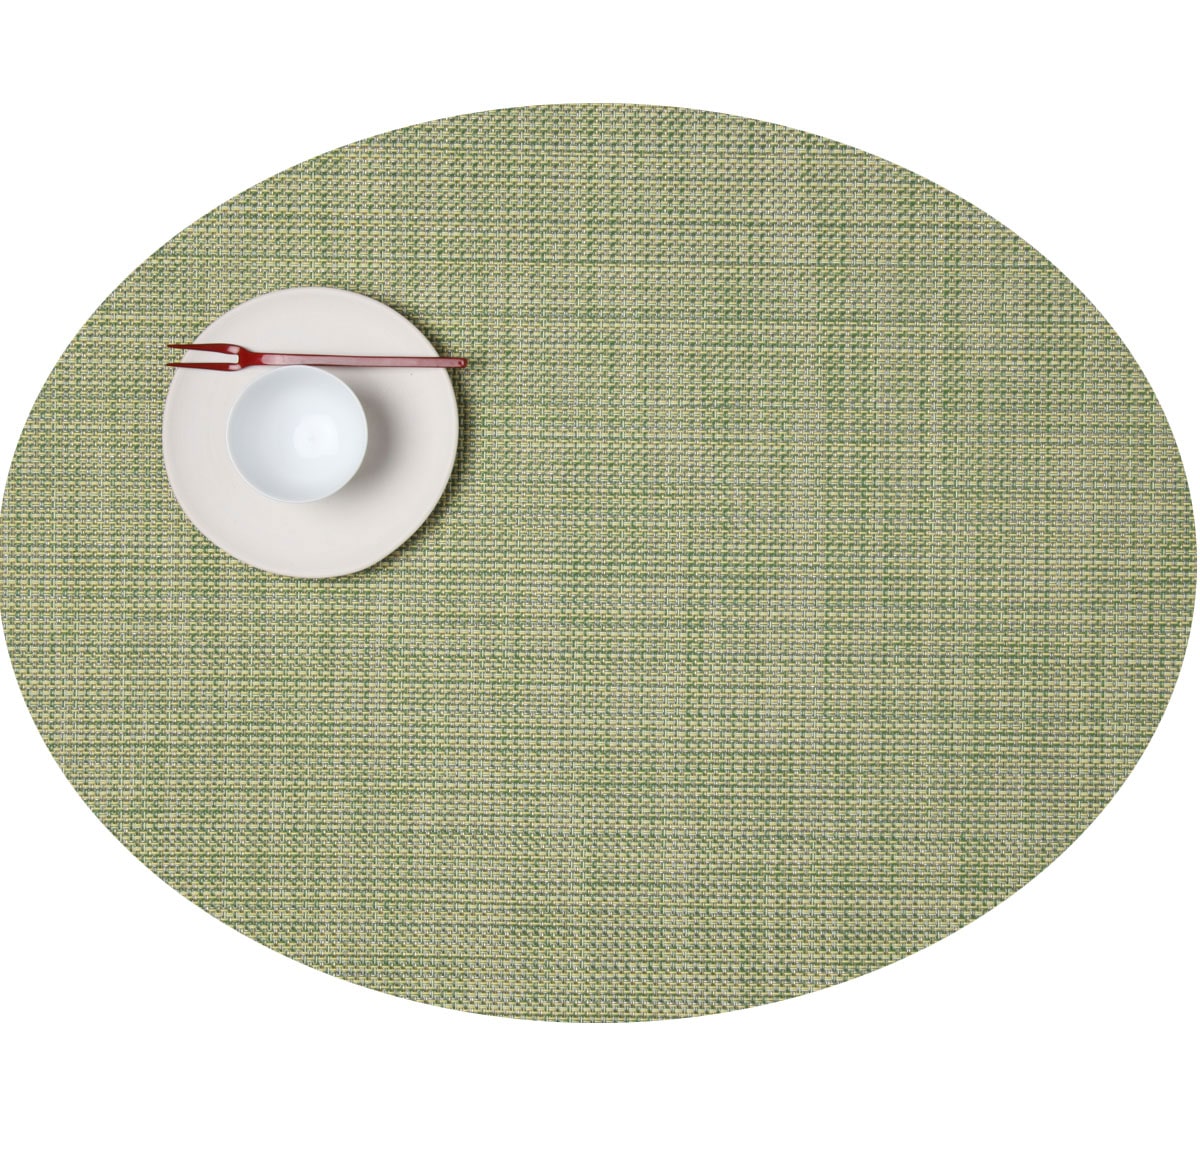 Mini Basketweave Placemat - Oval